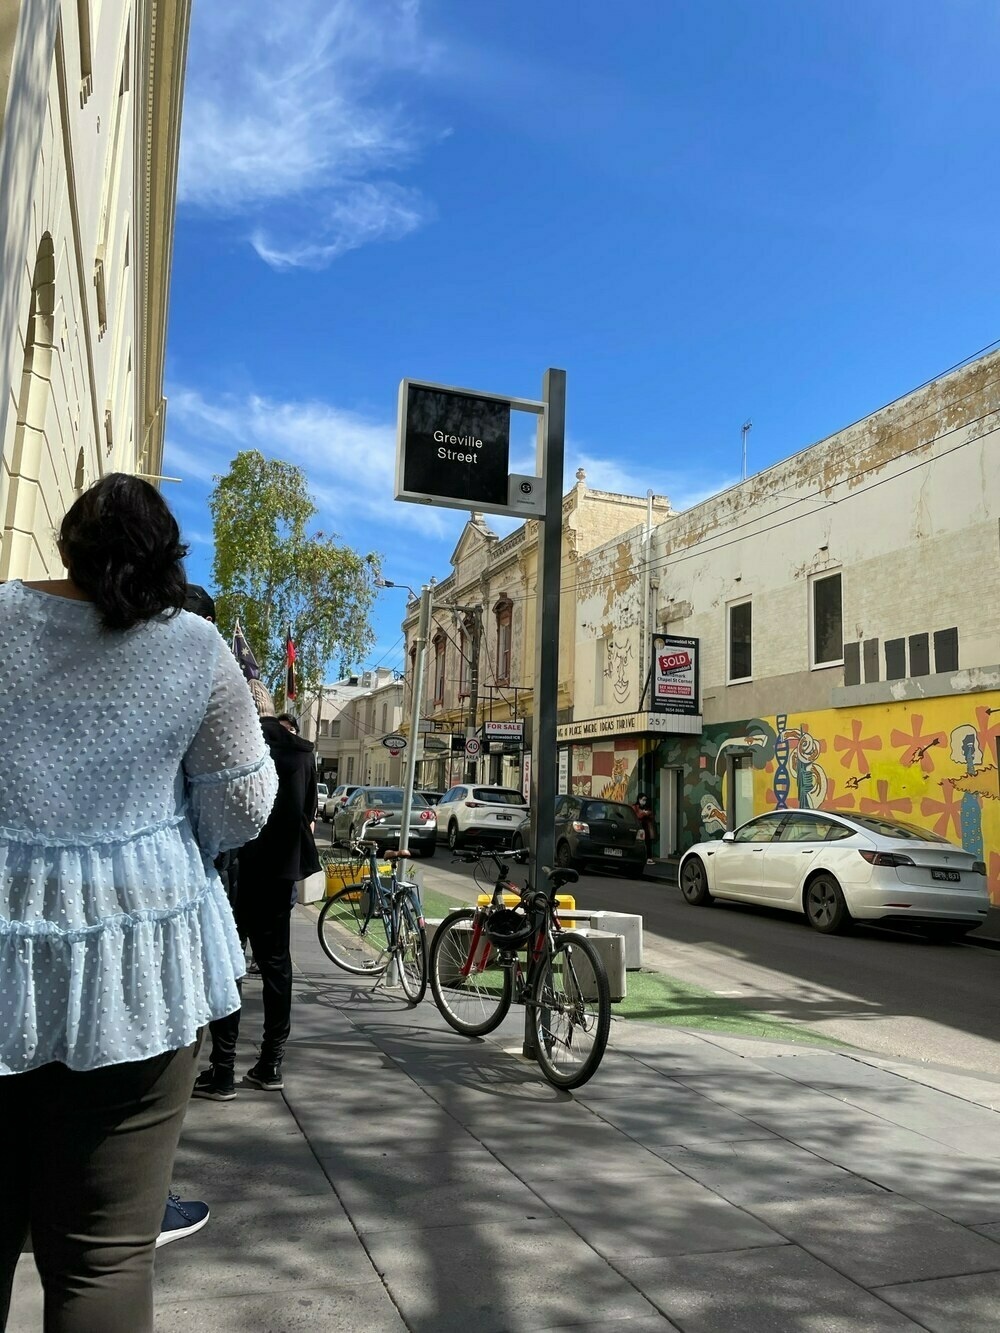 Greville St Prahran, with a queue of waiting people, a mural and a road devoid of traffic